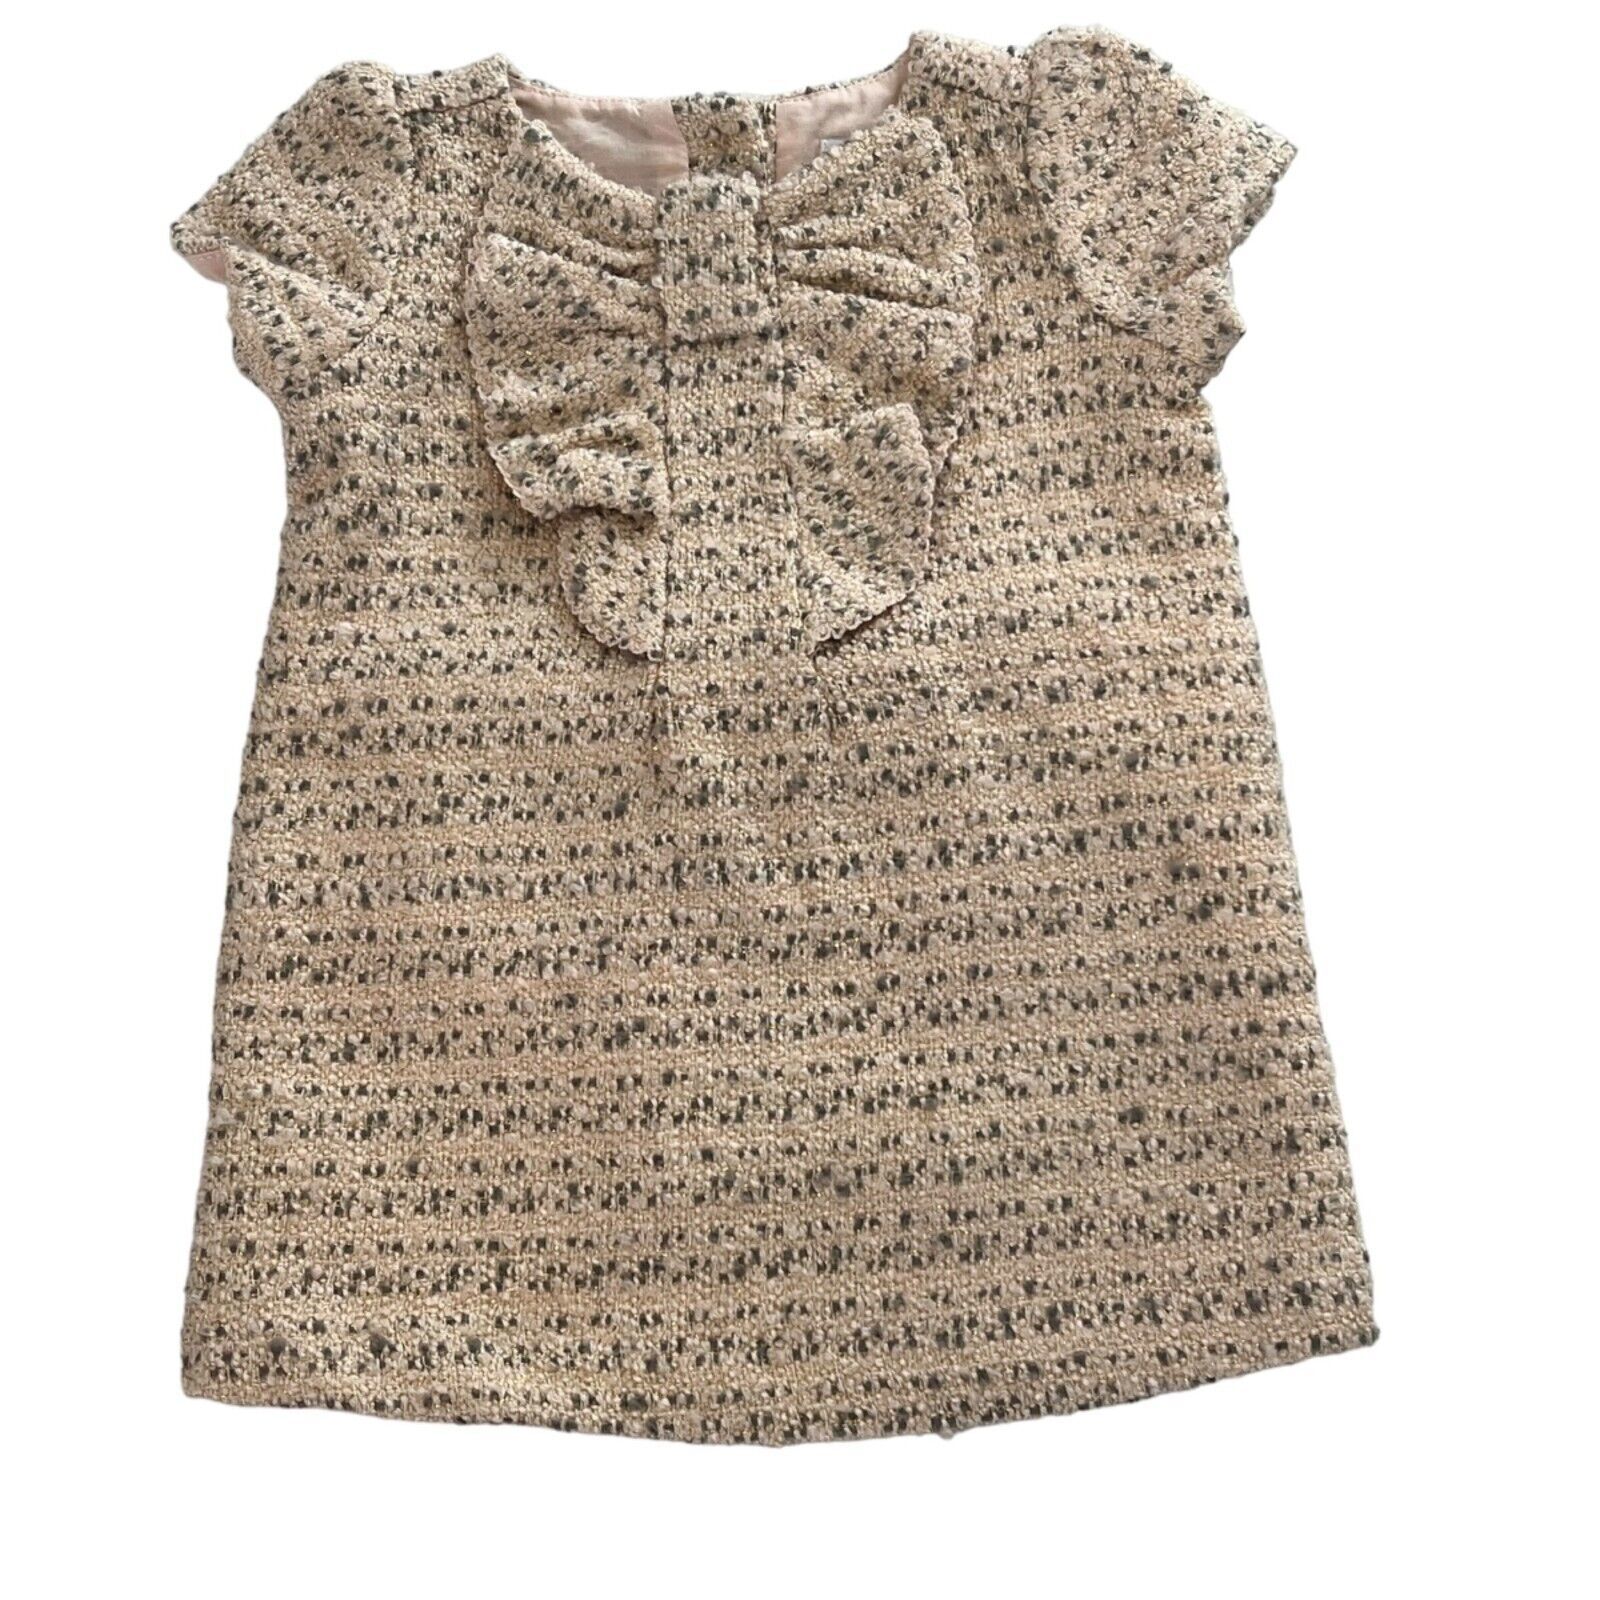 Primary image for Janie and Jack 3-6 Months NWOT Blush Boucle Tweed Dress & Bloomer